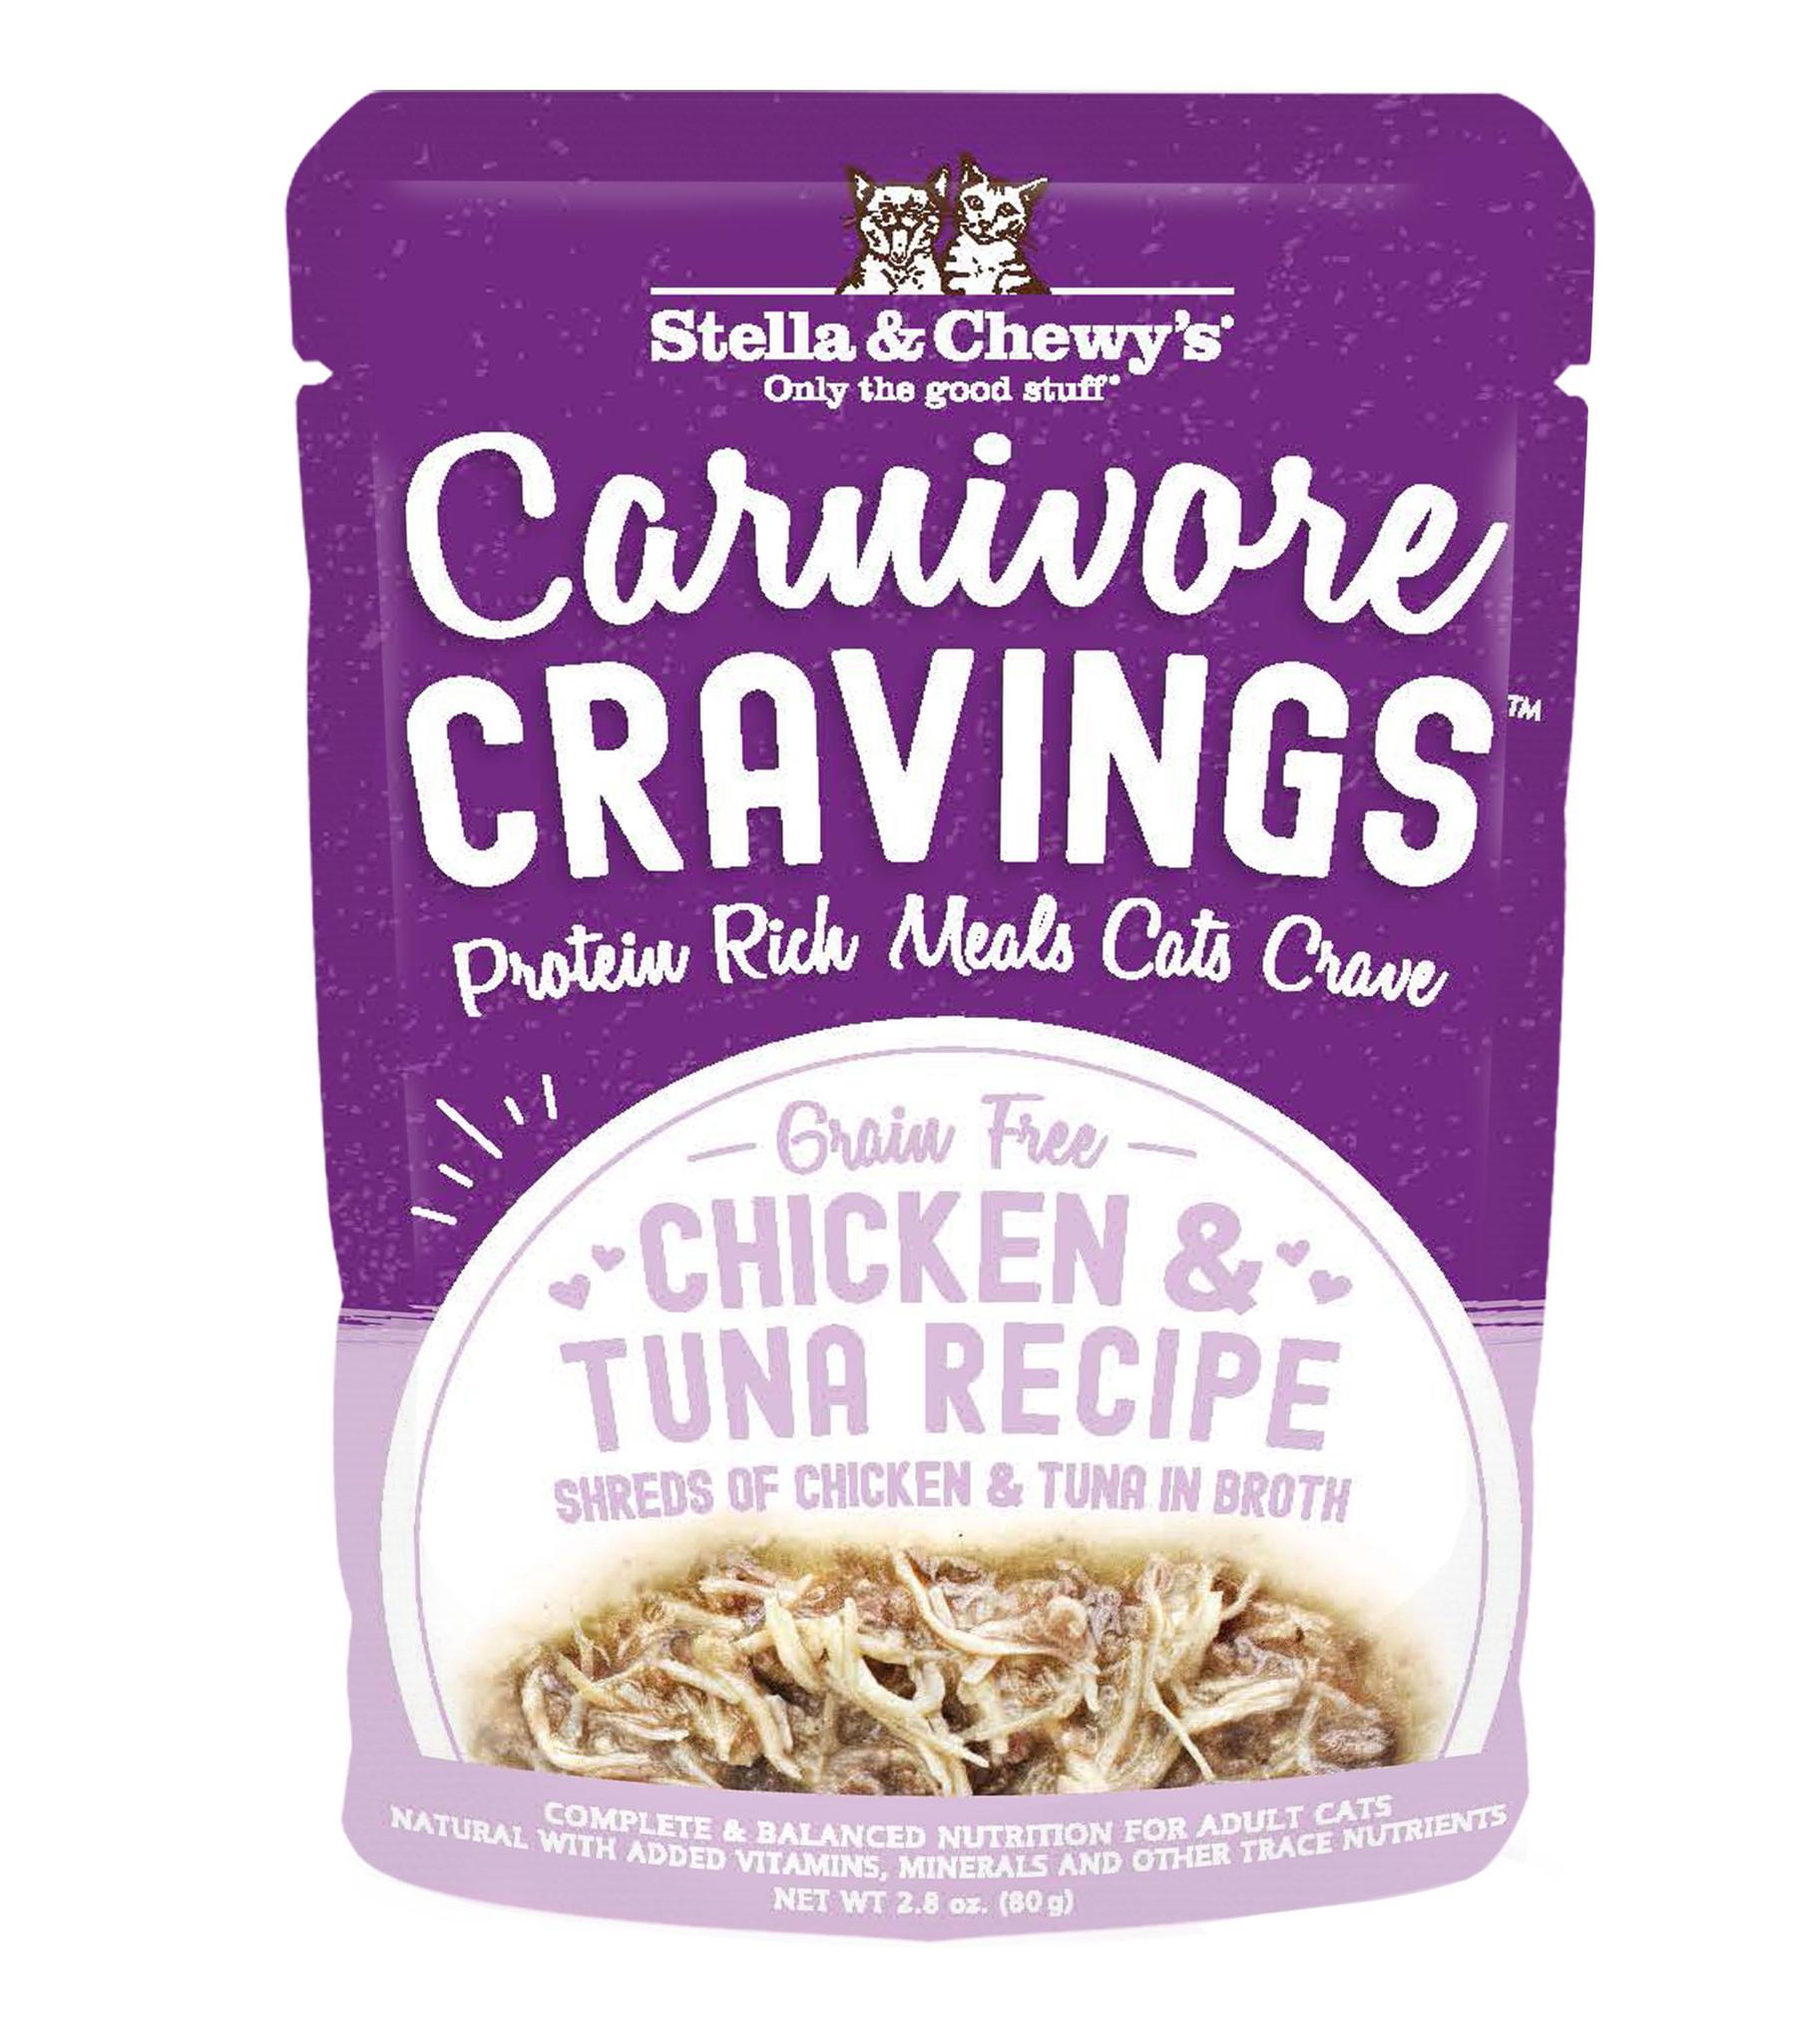 Stella & Chewy's Carnivore Cravings 2.8oz